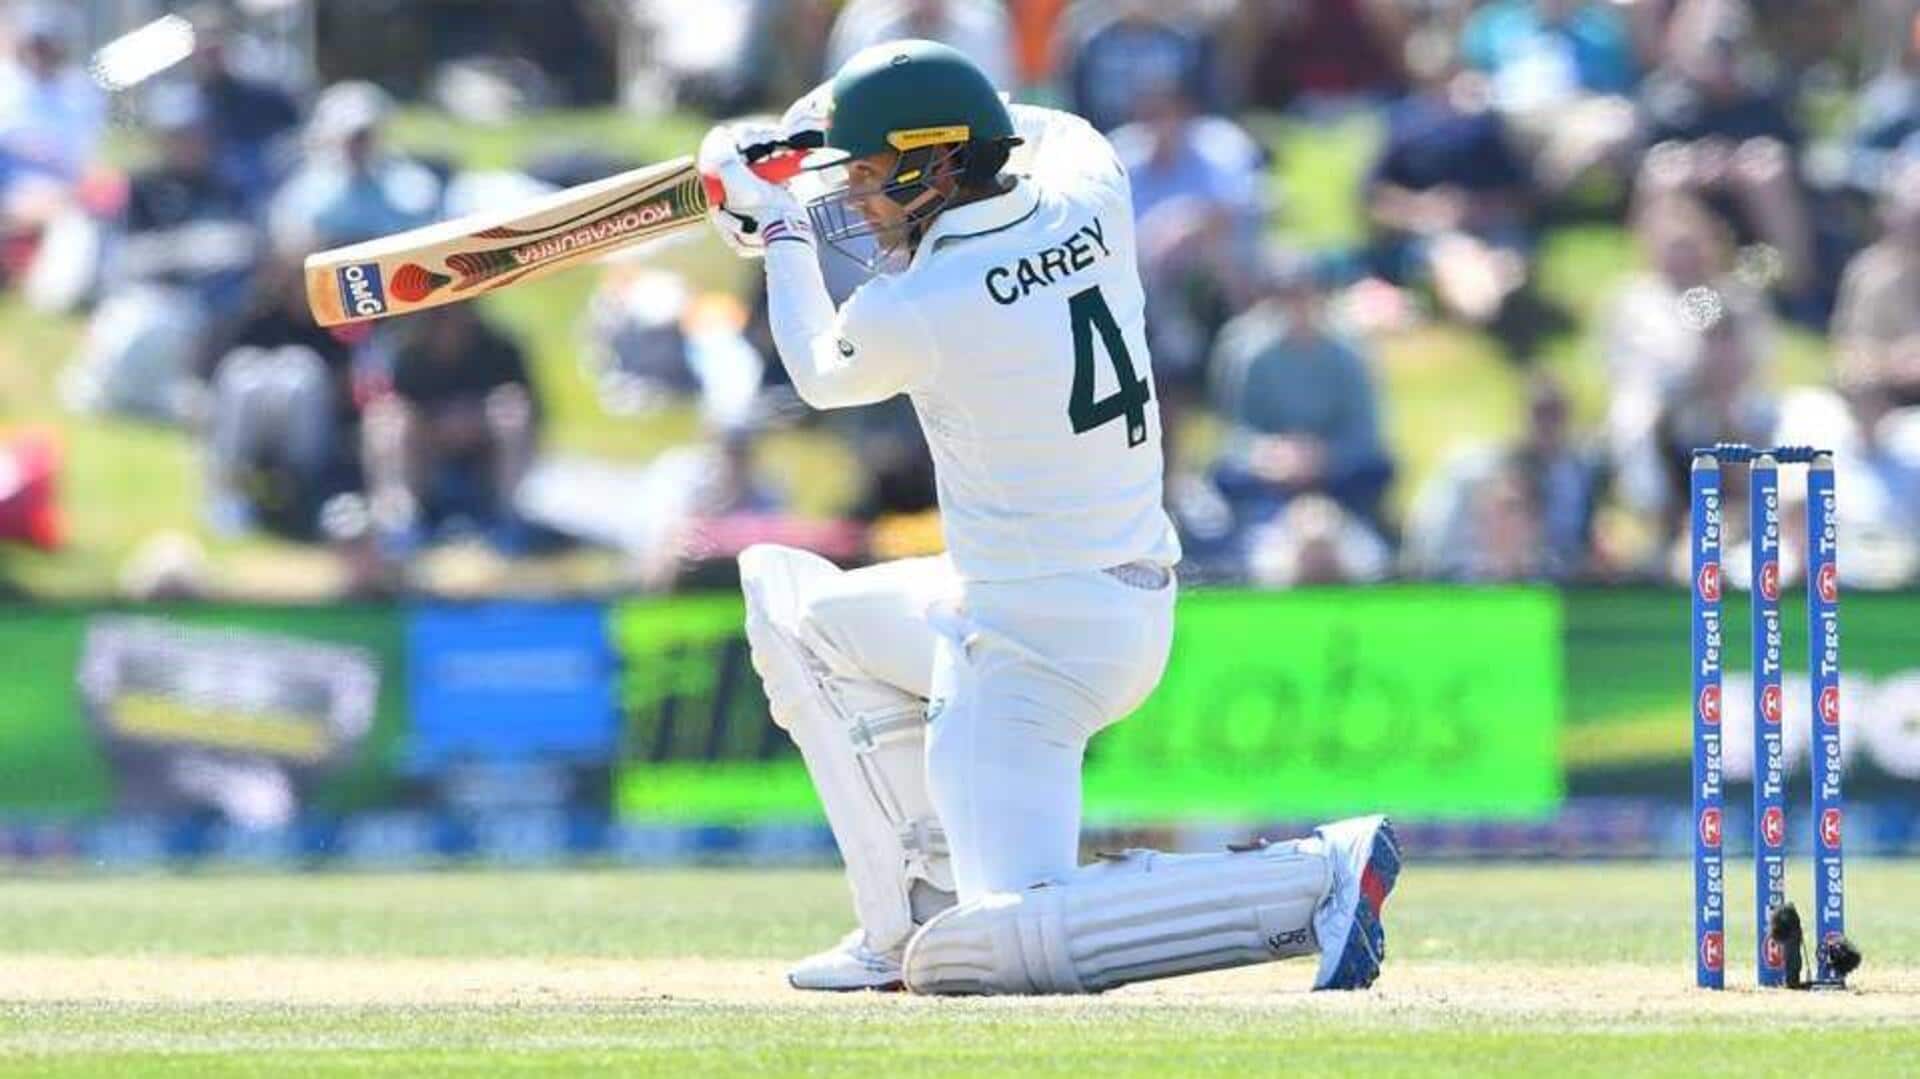 Christchurch Test: Alex Carey accomplishes this feat with match-winning 98*